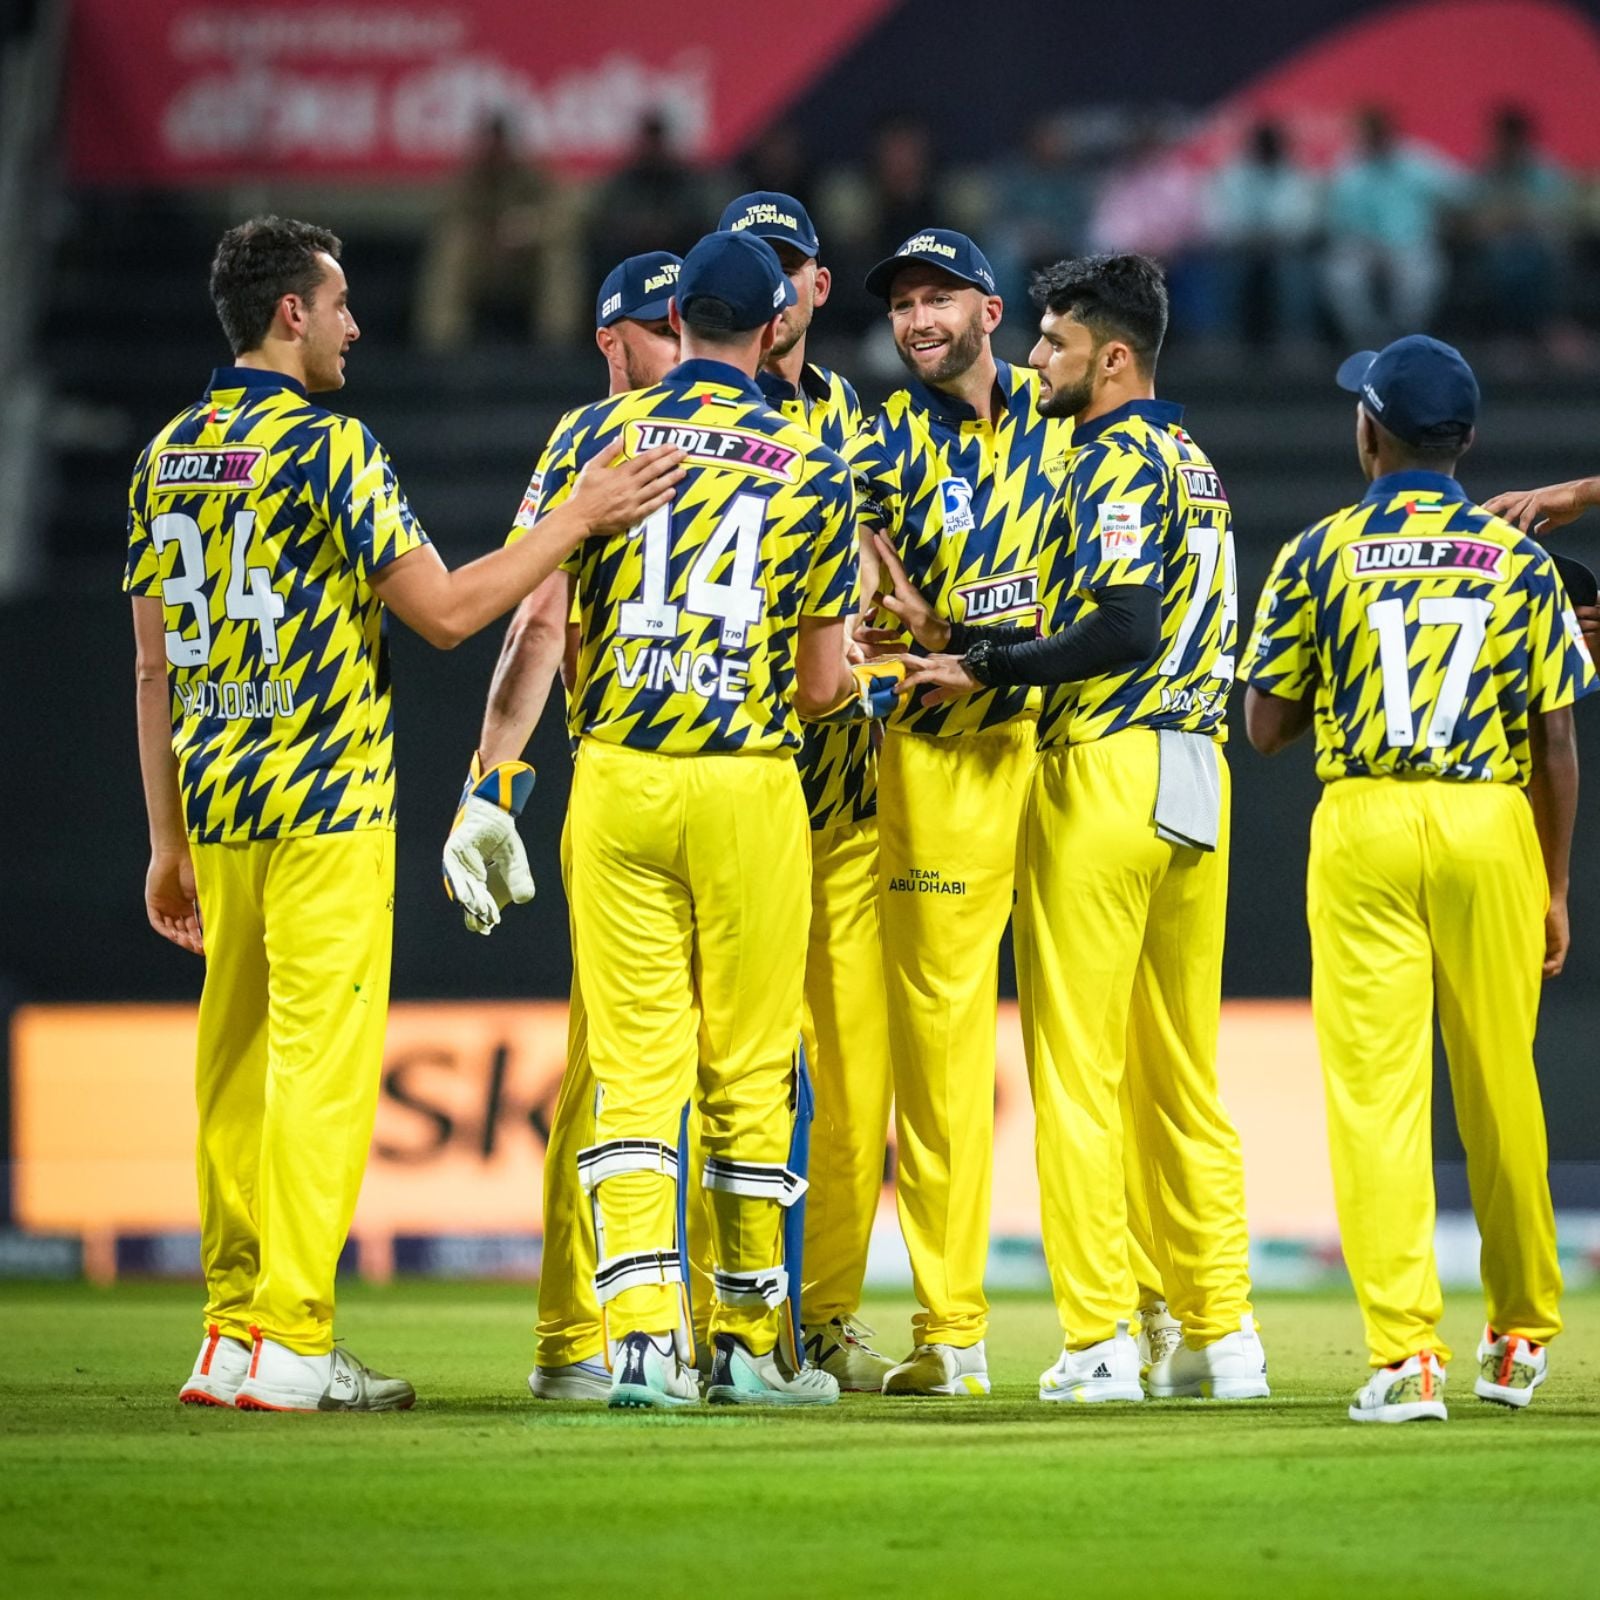 Abu Dhabi T10 League 2022 Team Abu Dhabi vs Northern Warriors Live Streaming When and Where to Watch Live Coverage on TV and Online